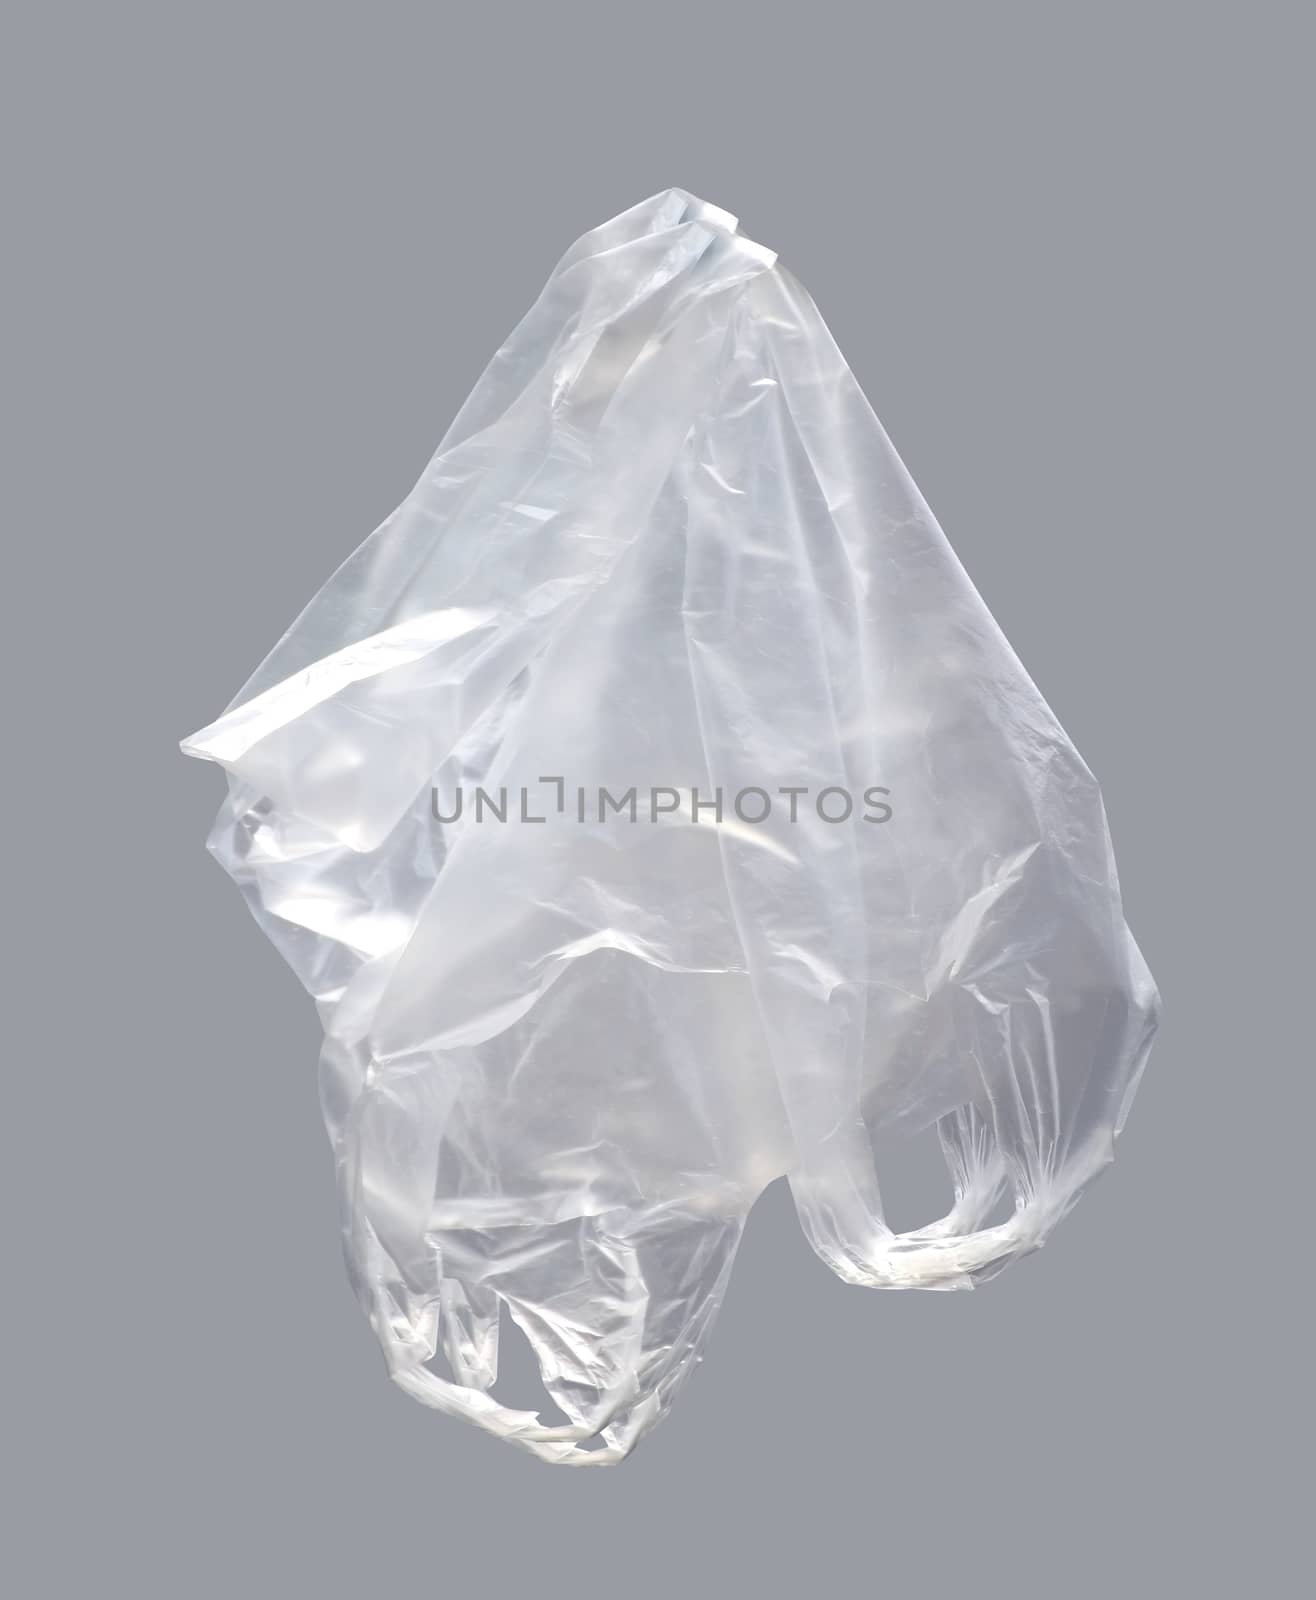 Plastic bag, Clear plastic bag on gray background, Plastic bag clear waste, Plastic bag clear garbage, Pollution from garbage waste bags by cgdeaw